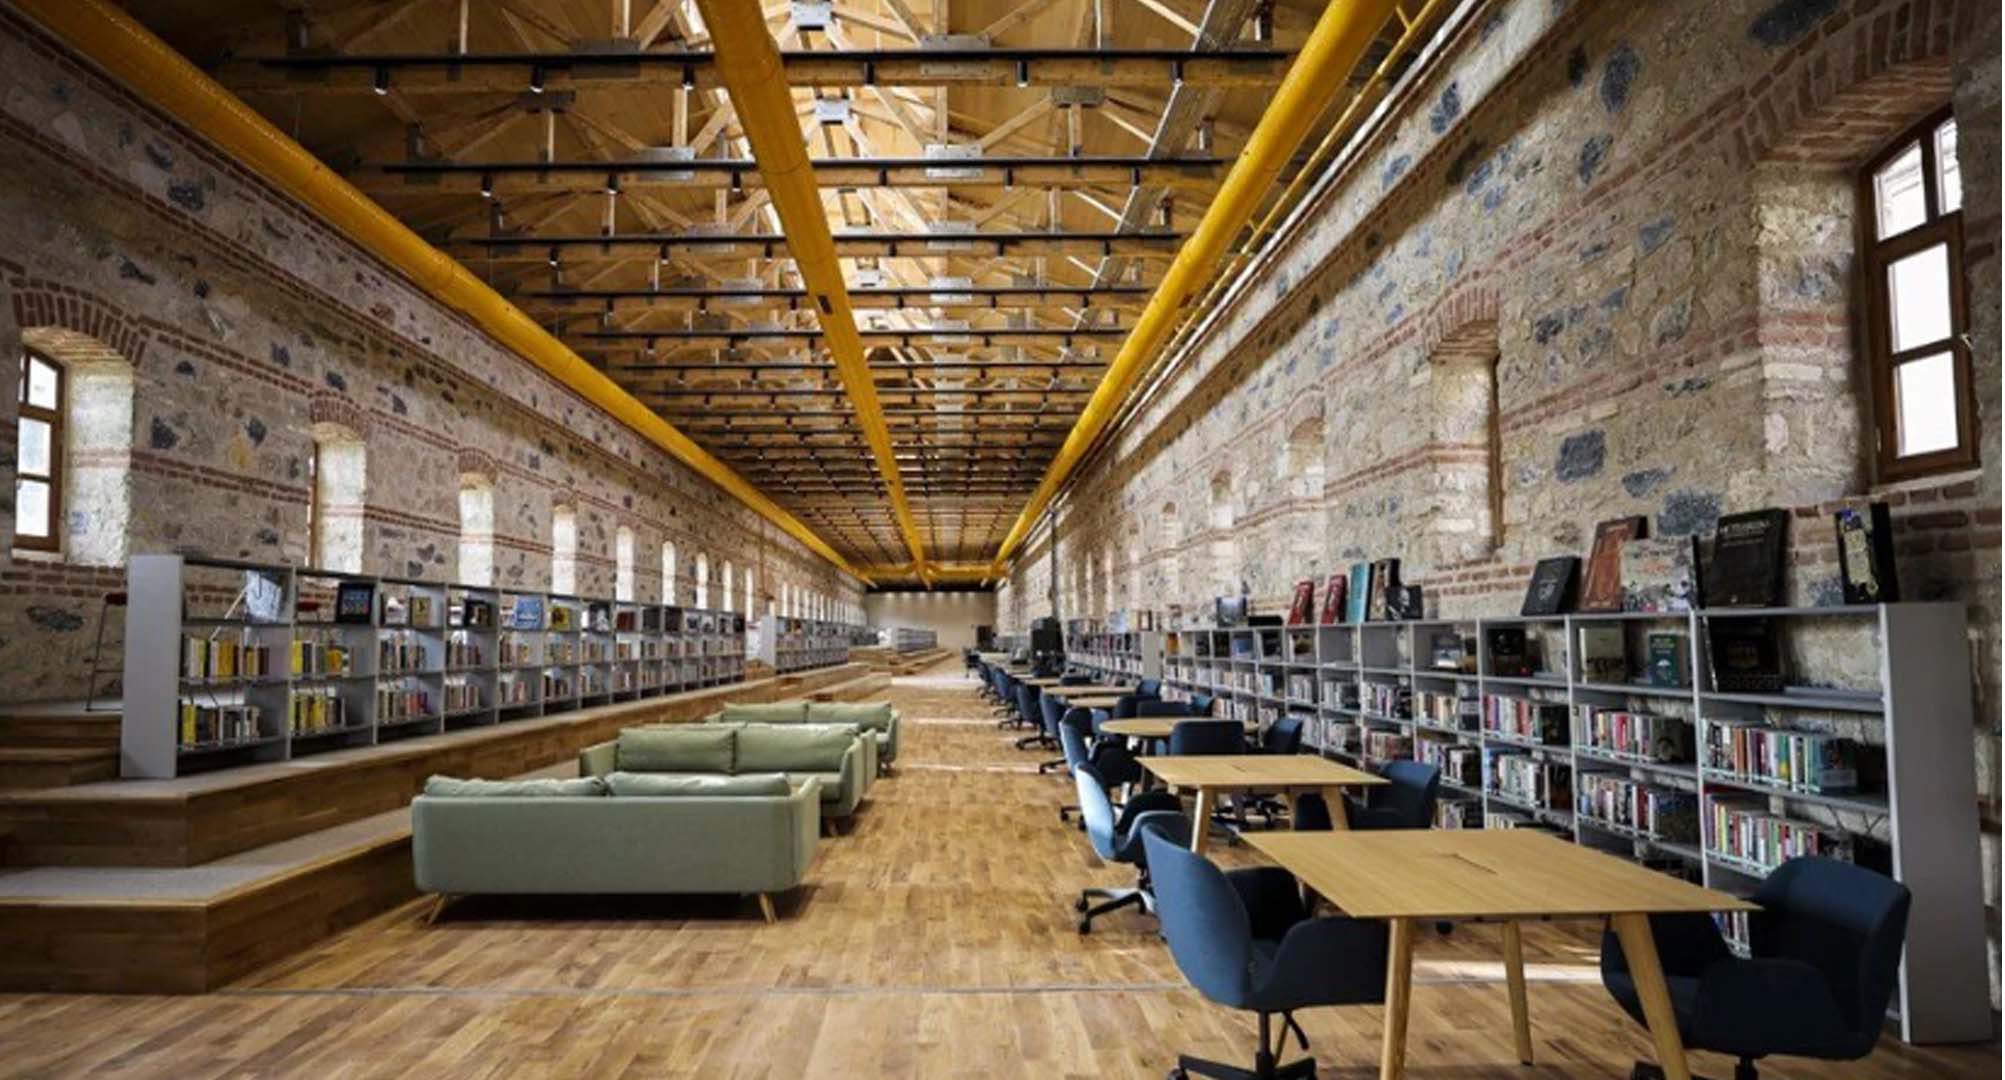 Configuration of the library 